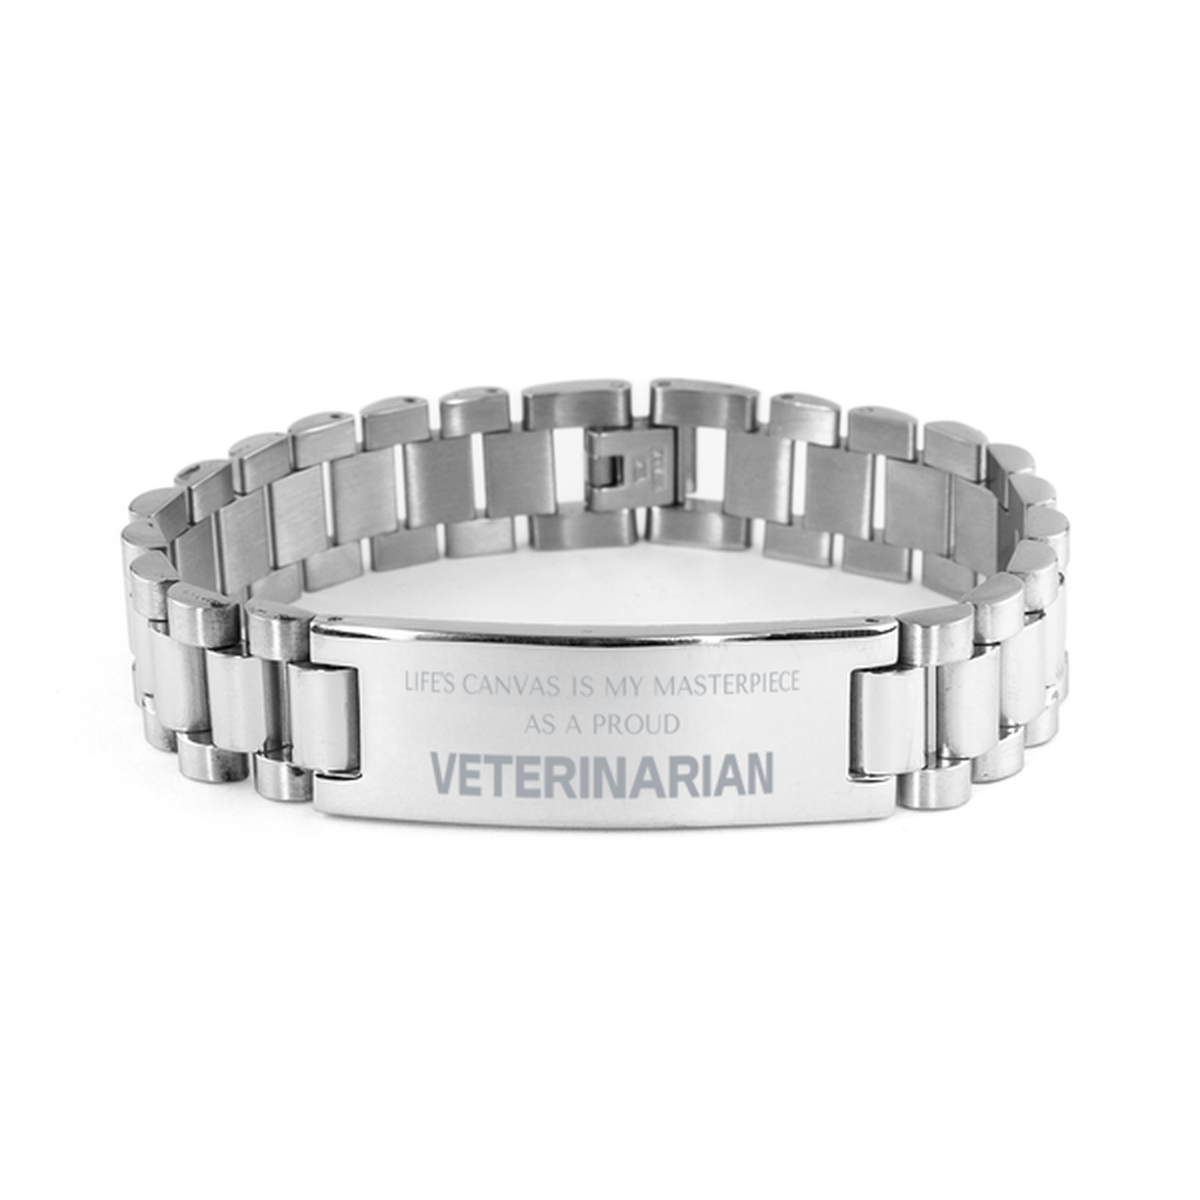 Proud Veterinarian Gifts, Life's canvas is my masterpiece, Epic Birthday Christmas Unique Ladder Stainless Steel Bracelet For Veterinarian, Coworkers, Men, Women, Friends